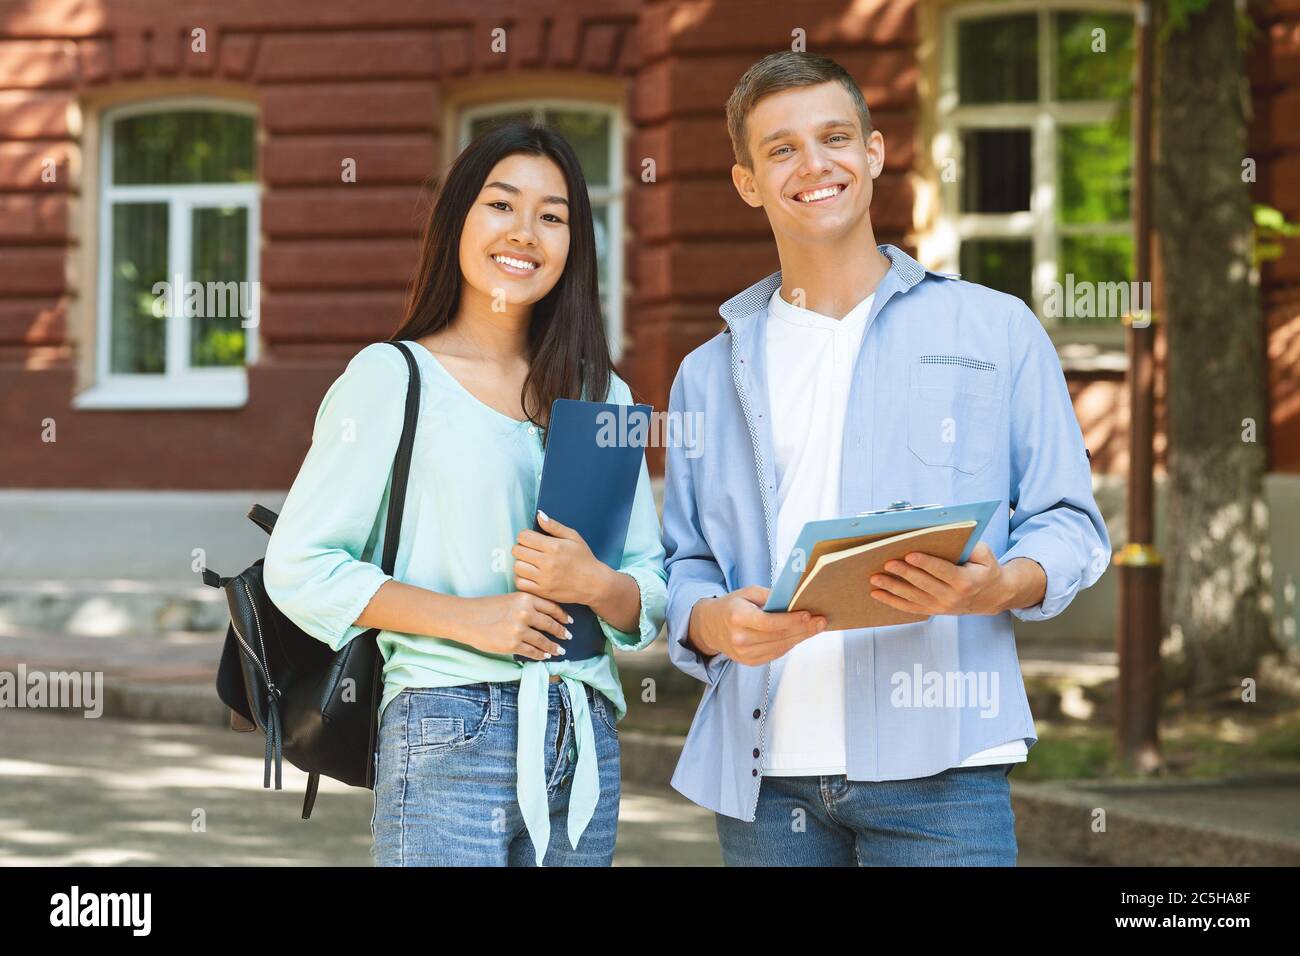 Portrait of smiling multiethnic students posing outdoors at campus after classes Stock Photo